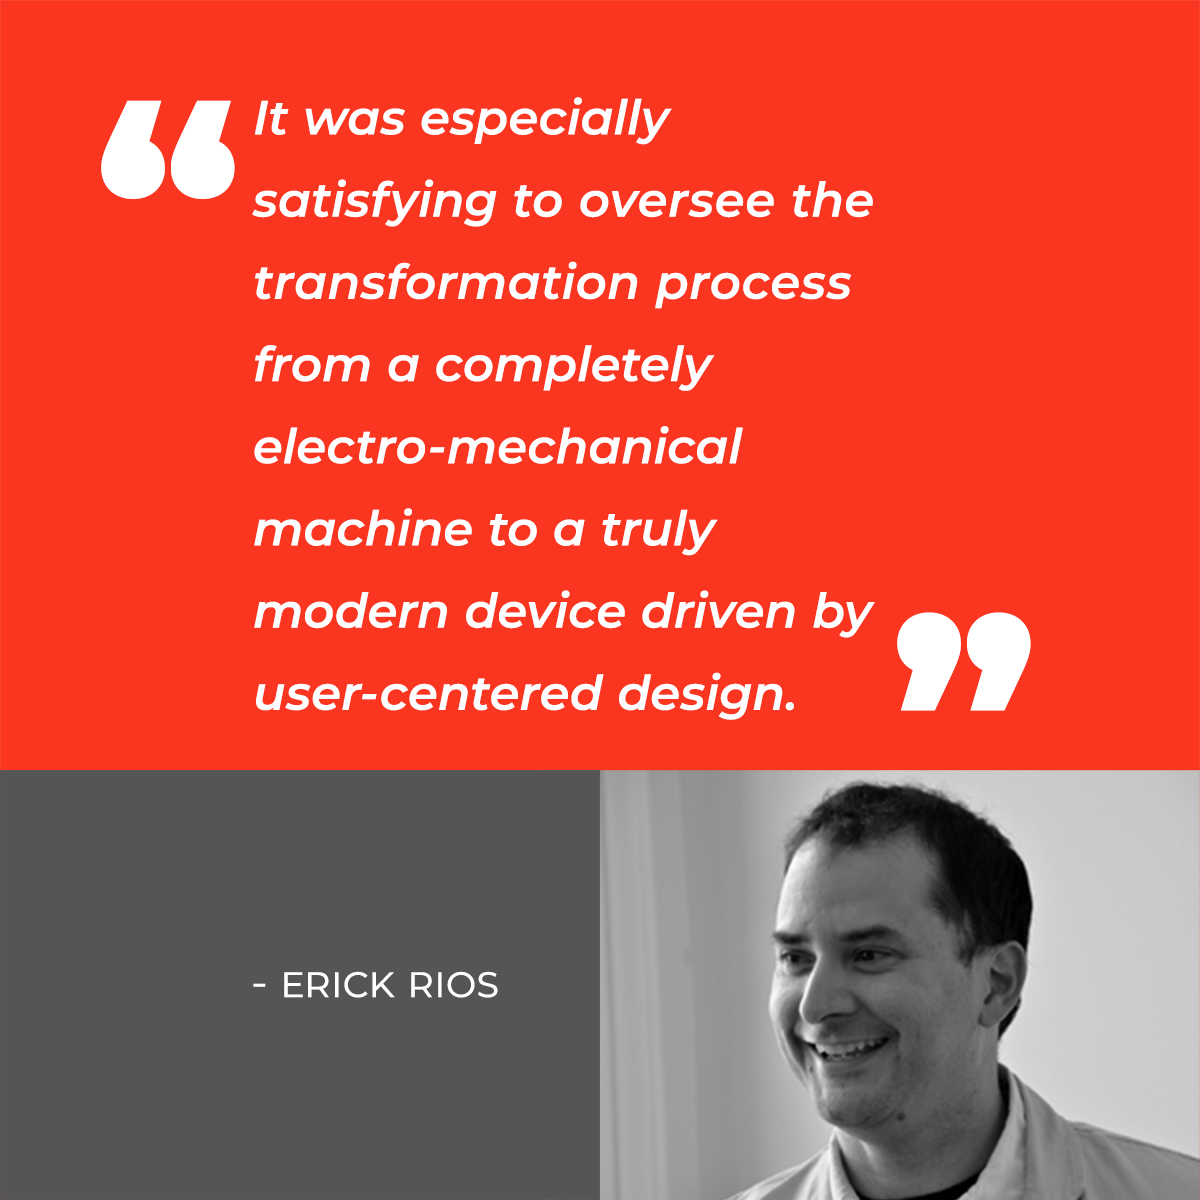 Quote by Erick Rios